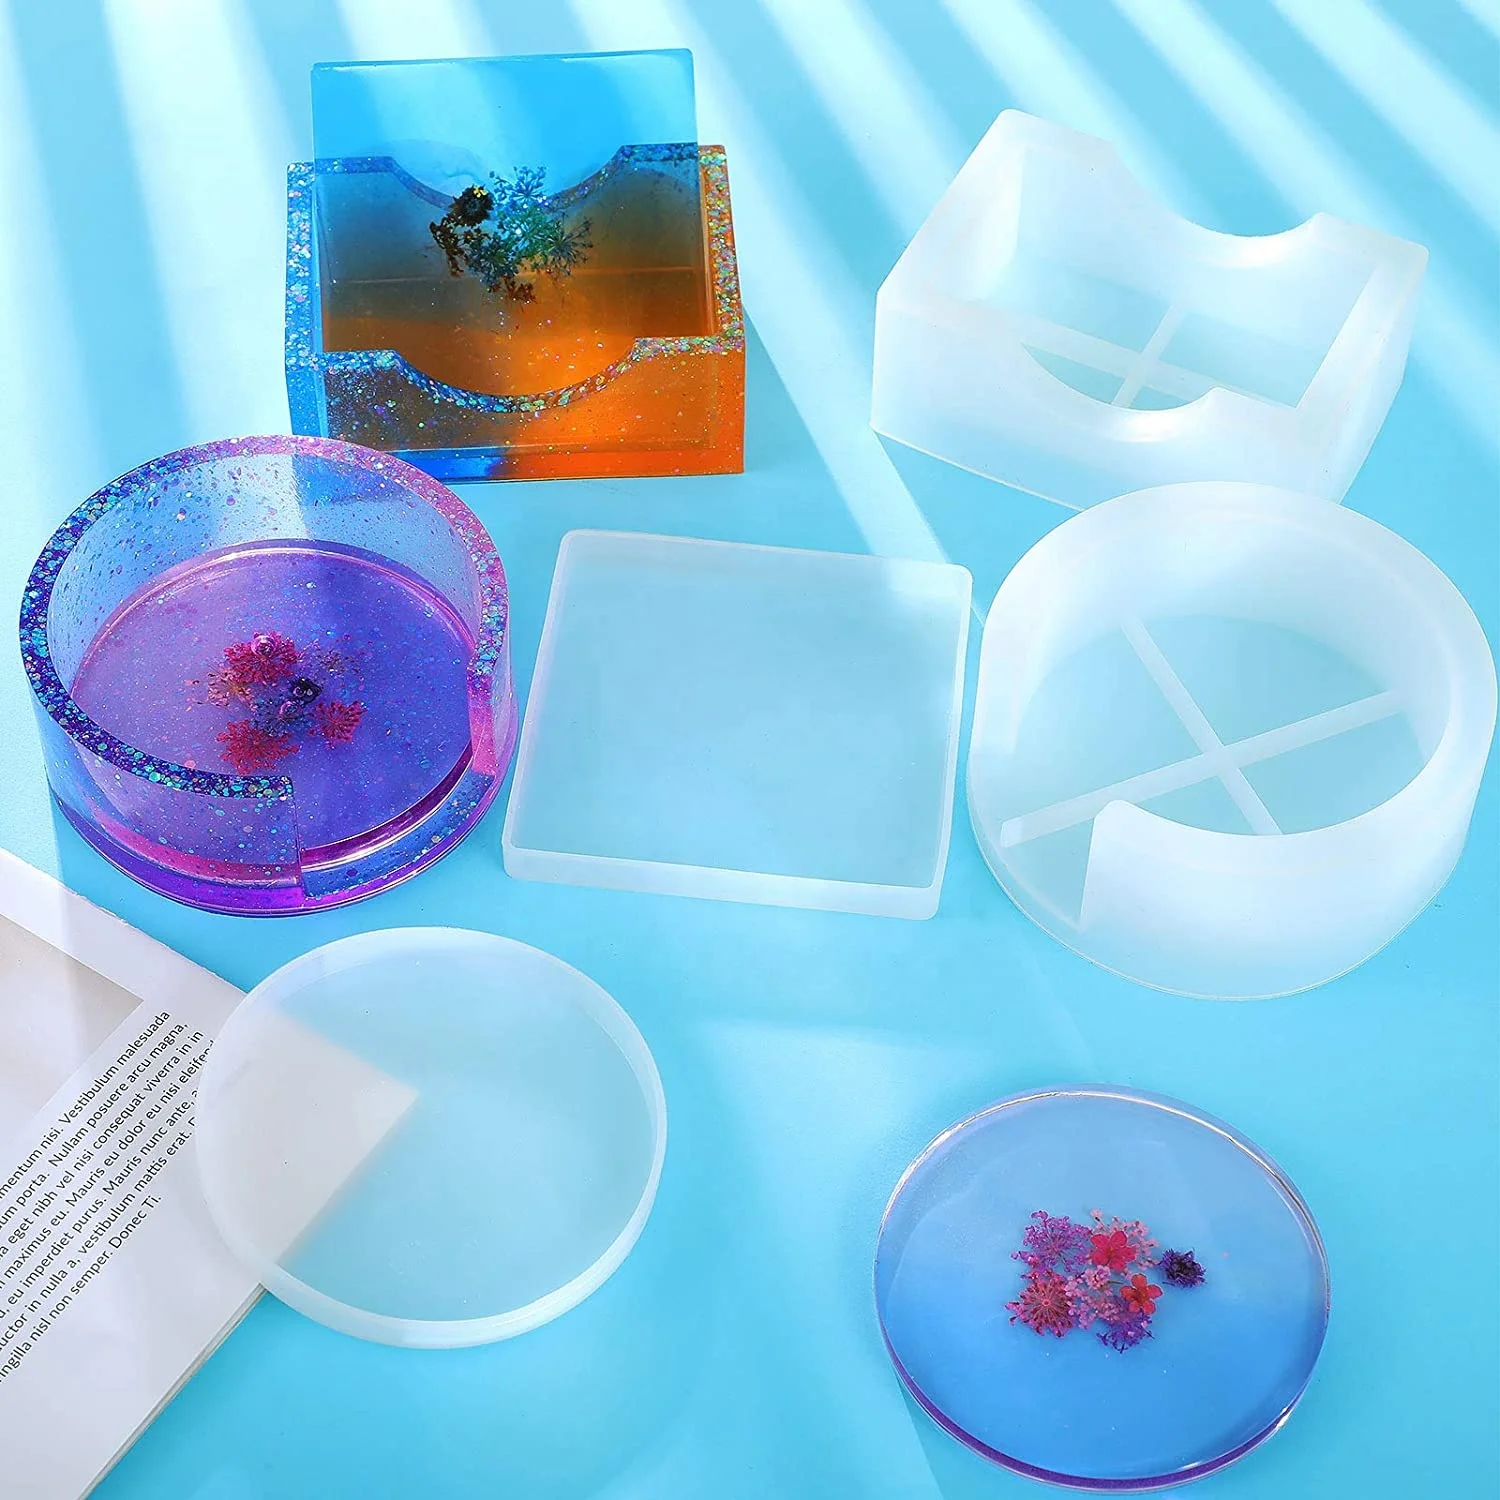 

DIY Home Decoration Geode Agate Resin Crafts Trinket Organizer square round Cups Mats holder Silicone Coaster Storage Box Mold, Clear silicone mold